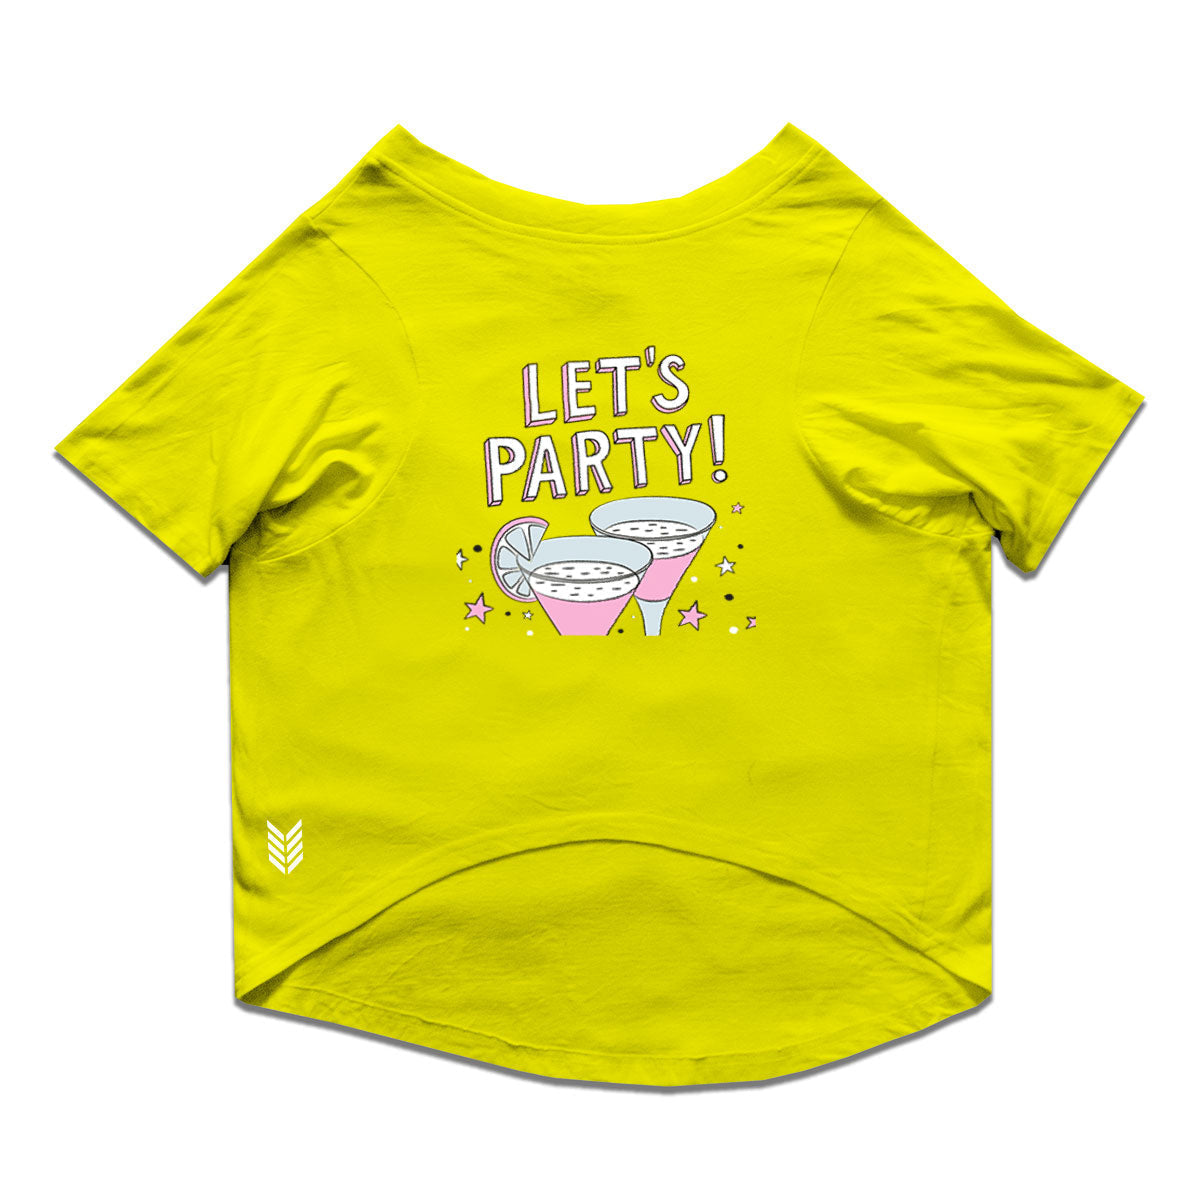 Ruse / Yellow Ruse Basic Crew Neck "Let's Party" Printed Half Sleeves Dog Tee12